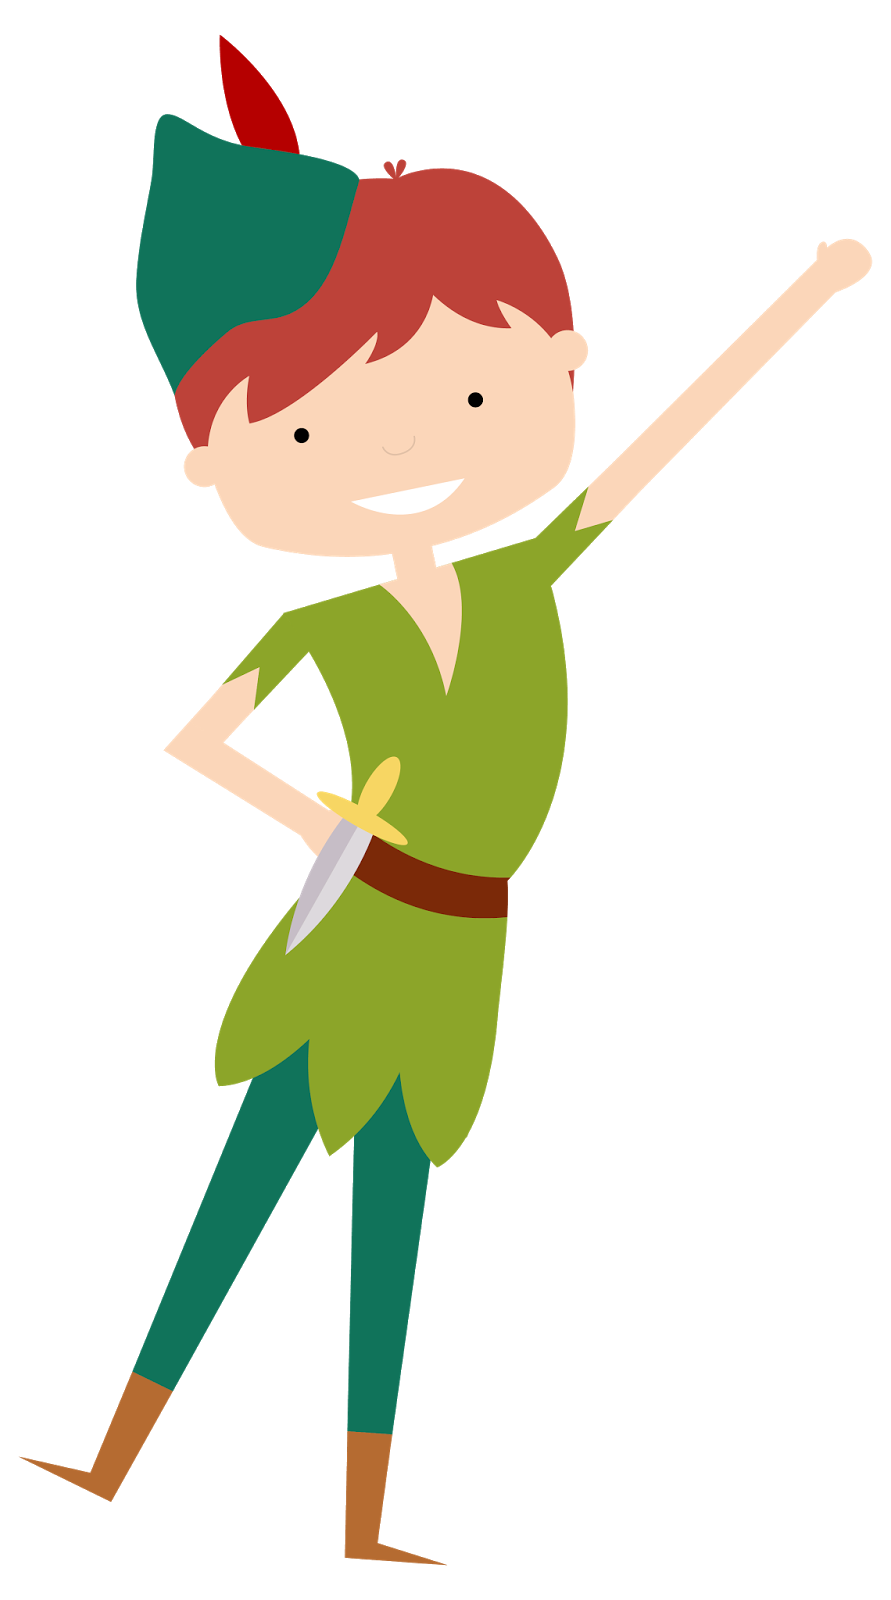 Peter Pan Silhouette Clipart